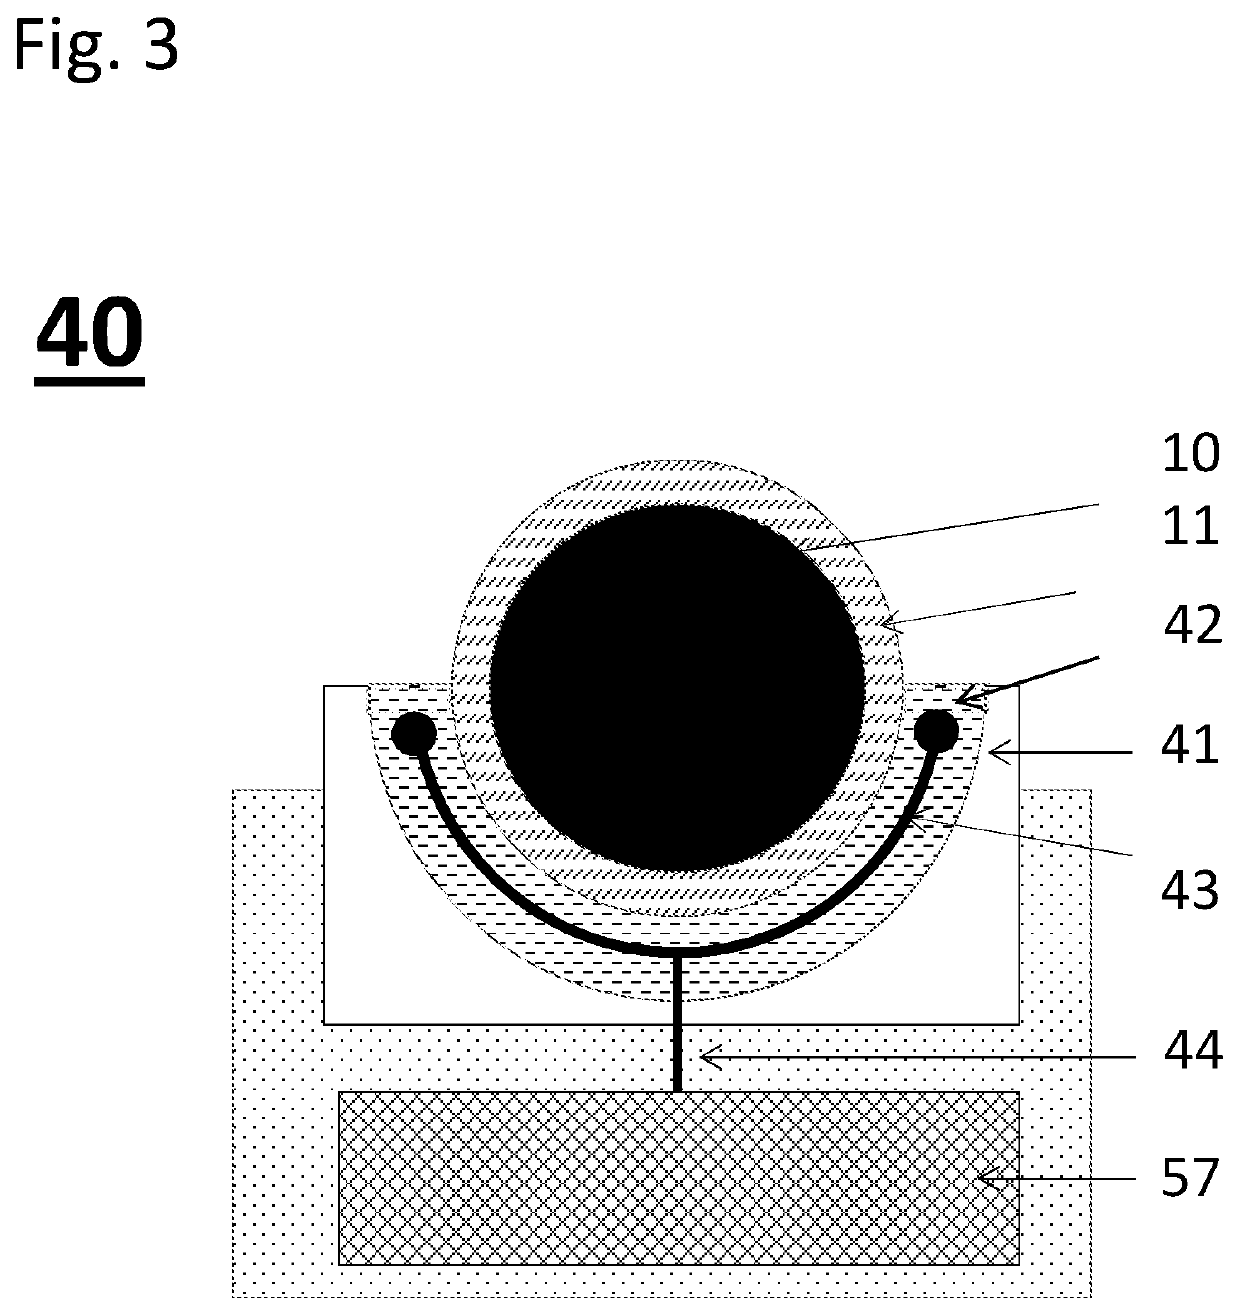 Method for measuring an impedance of an electric cable, a coupler arrangement and uses thereof